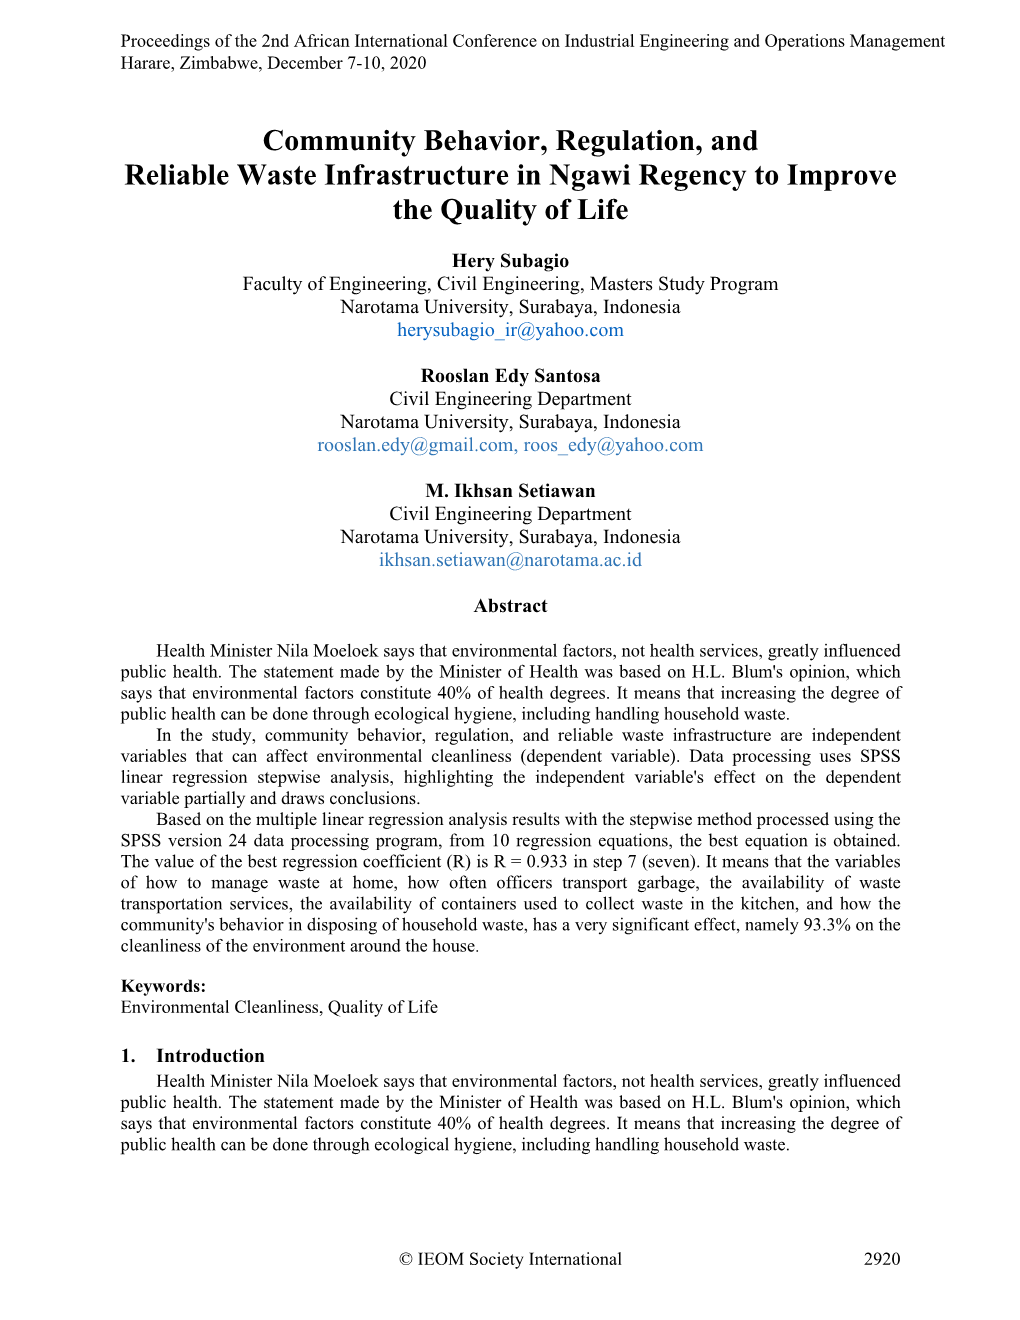 ID 668 Community Behavior, Regulation, and Reliable Waste